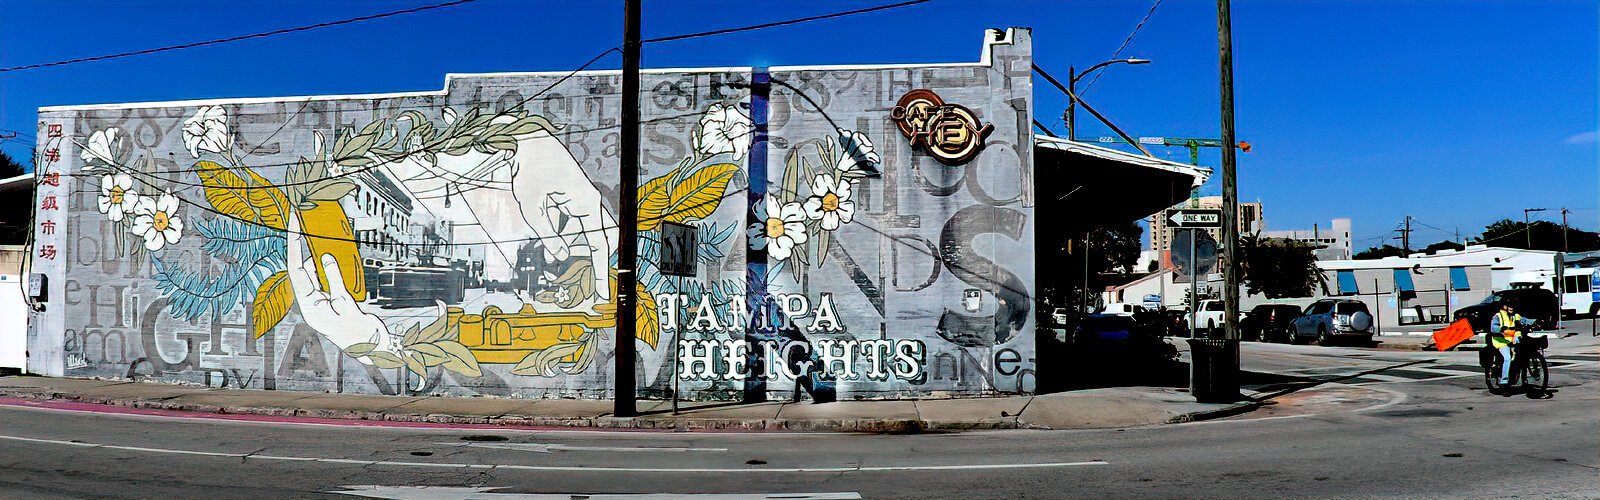 Reflecting Tampa Heights’ history, this mural on the side of Café Hey was created by Tony Krol and Michelle Sawyer, aka Illsol, in 2015.